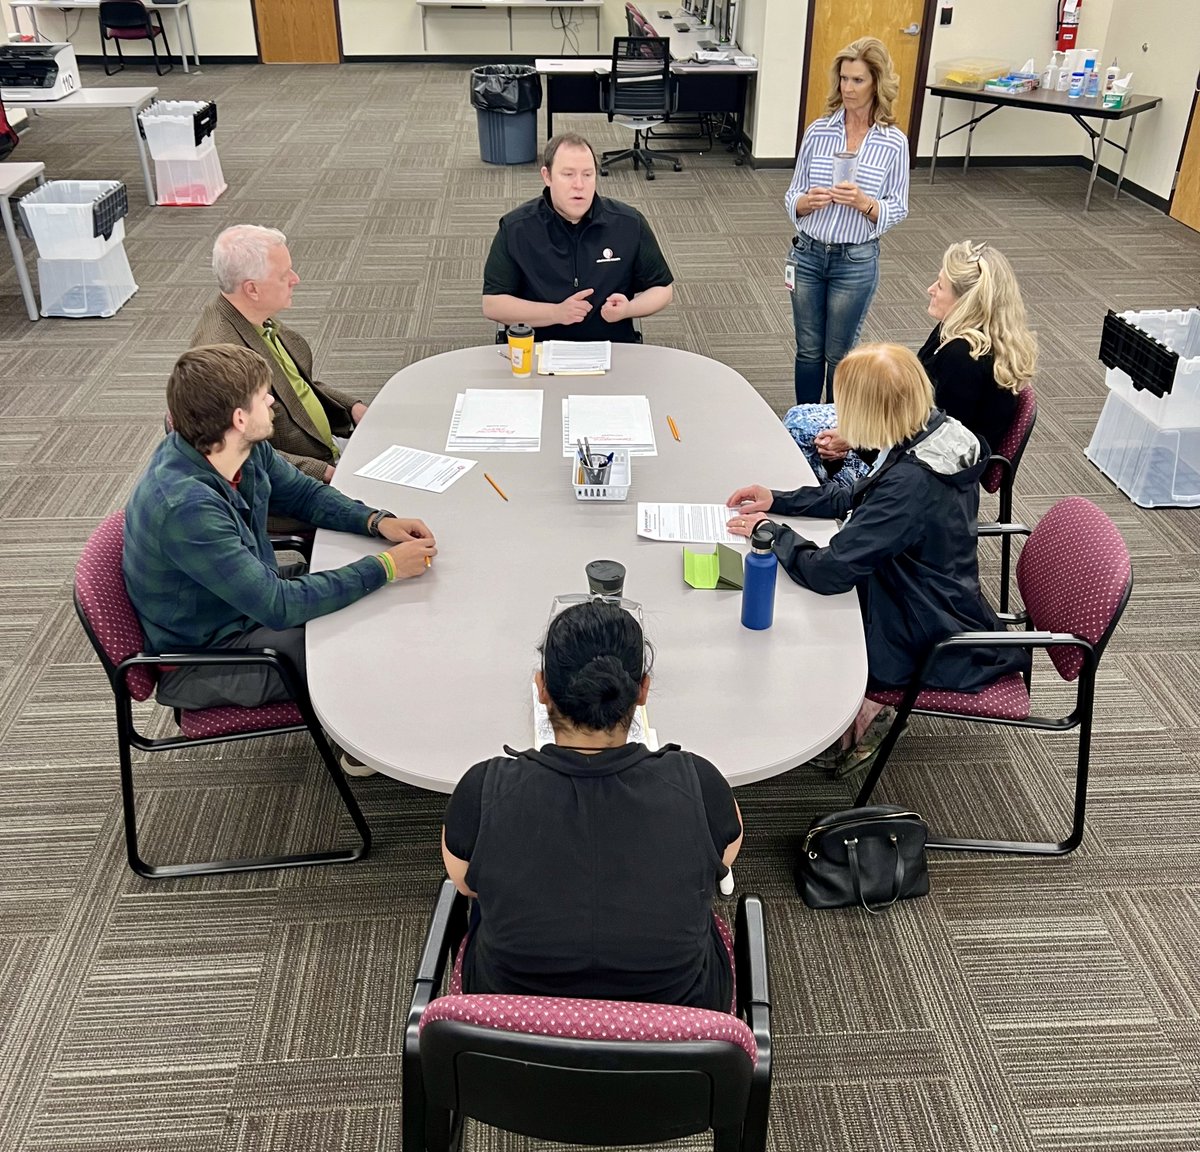 It's Logic and Accuracy Testing Day! Representatives from the @ArapahoeCounty Democratic and Republican parties are about to hand mark and hand tally test ballots, then run them through our scanners to make sure the machine count matches the hand count. Stay tuned!